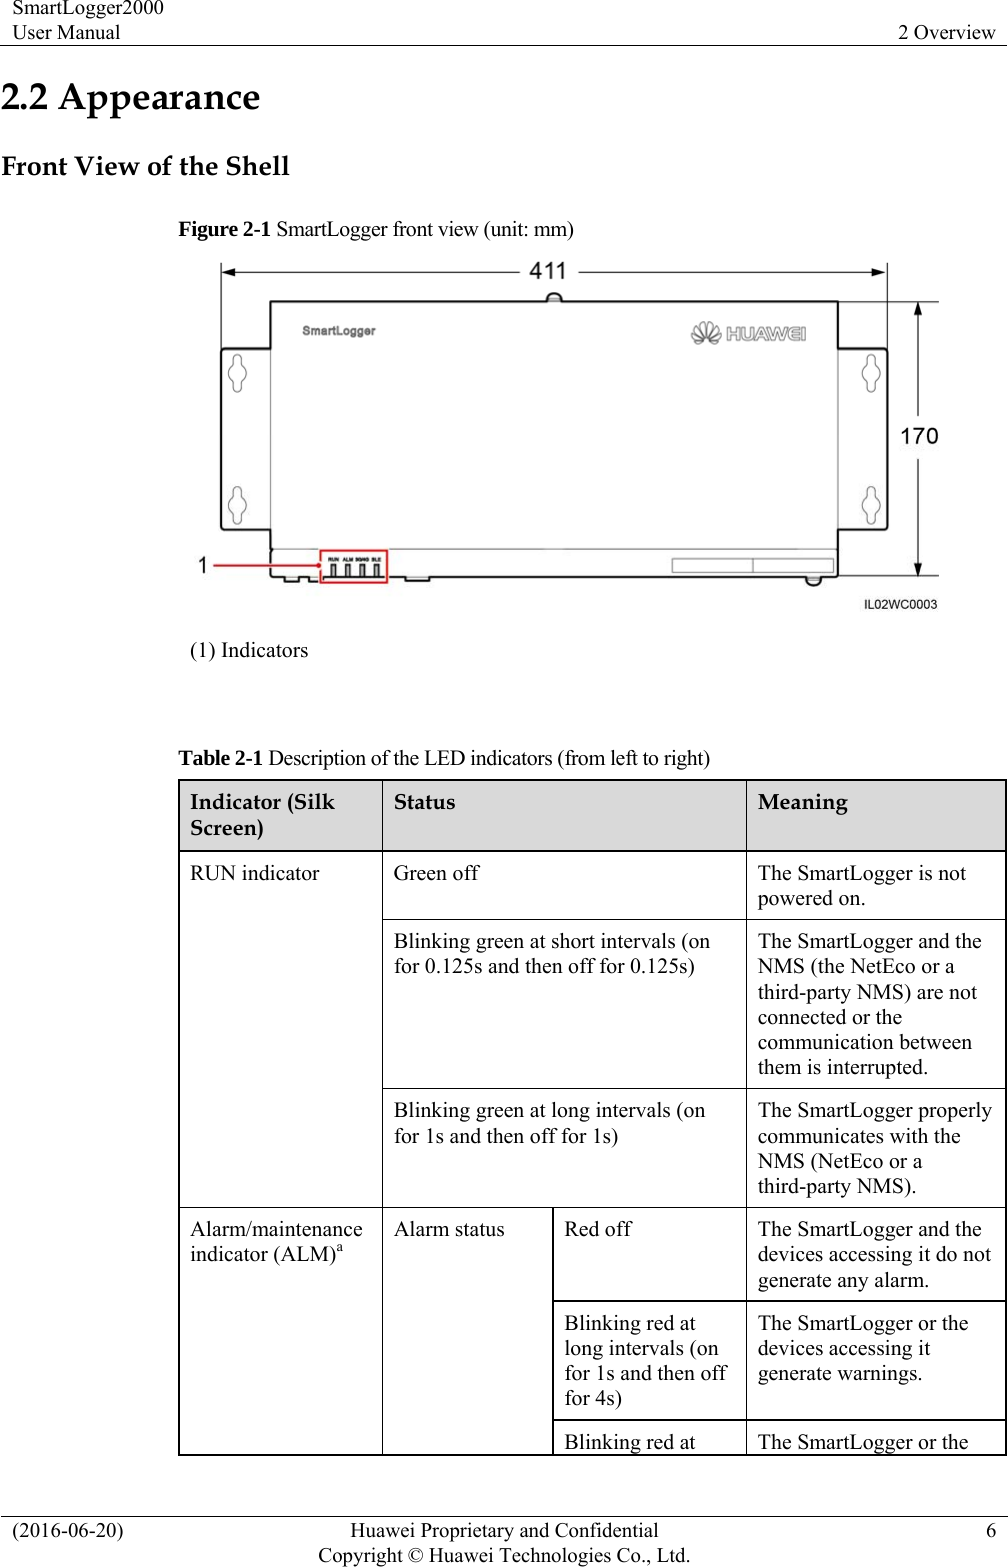 SmartLogger2000 User Manual  2 Overview (2016-06-20)  Huawei Proprietary and Confidential         Copyright © Huawei Technologies Co., Ltd.6 2.2 Appearance Front View of the Shell Figure 2-1 SmartLogger front view (unit: mm)  (1) Indicators  Table 2-1 Description of the LED indicators (from left to right) Indicator (Silk Screen) Status  Meaning RUN indicator  Green off  The SmartLogger is not powered on. Blinking green at short intervals (on for 0.125s and then off for 0.125s) The SmartLogger and the NMS (the NetEco or a third-party NMS) are not connected or the communication between them is interrupted. Blinking green at long intervals (on for 1s and then off for 1s) The SmartLogger properly communicates with the NMS (NetEco or a third-party NMS). Alarm/maintenance indicator (ALM)a Alarm status  Red off  The SmartLogger and the devices accessing it do not generate any alarm. Blinking red at long intervals (on for 1s and then off for 4s) The SmartLogger or the devices accessing it generate warnings. Blinking red at  The SmartLogger or the 